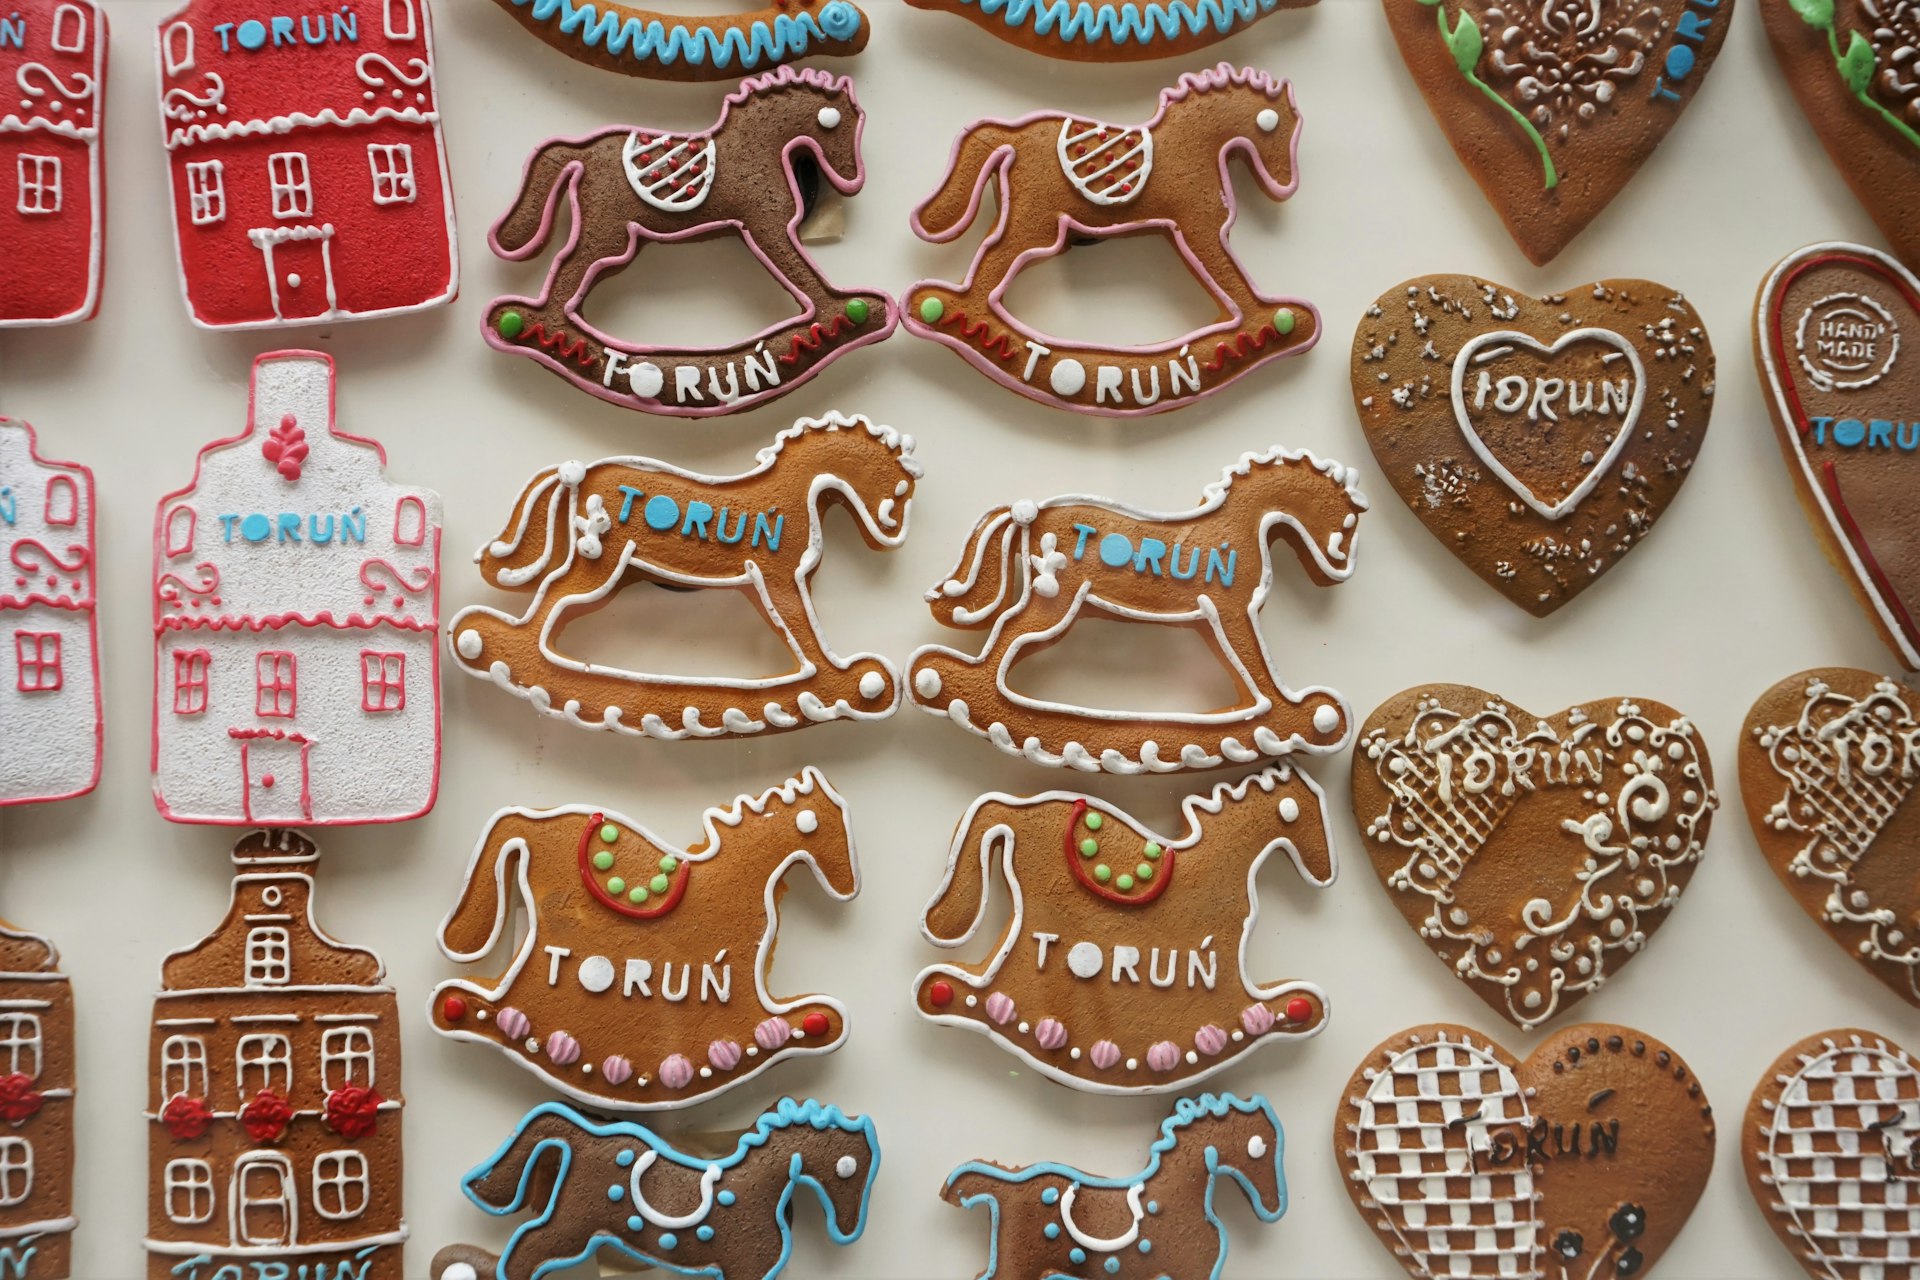 A display of decorated gingerbread cookies in the shape of rocking horses, love hearts and houses.